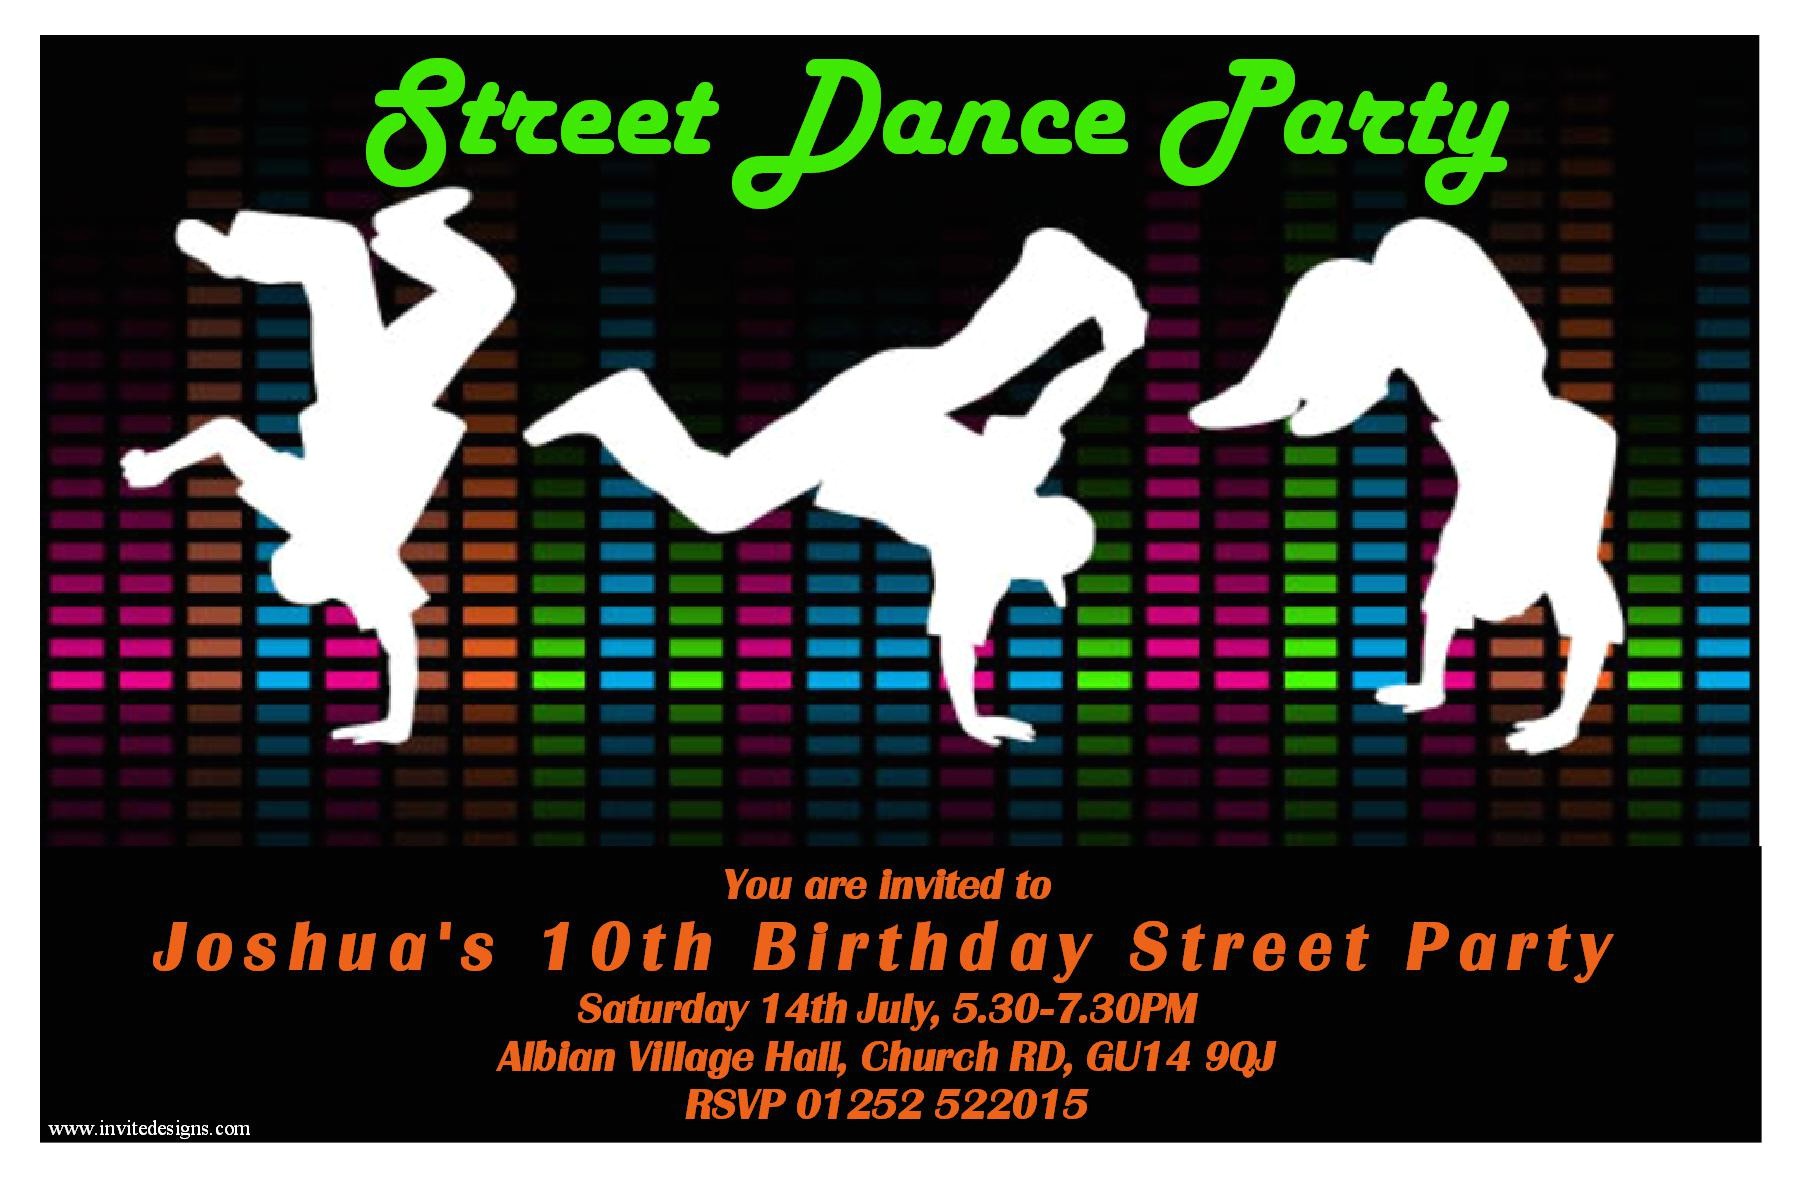 Dance Party Invitations Free Dance Party Invitations Party Invitations Templates